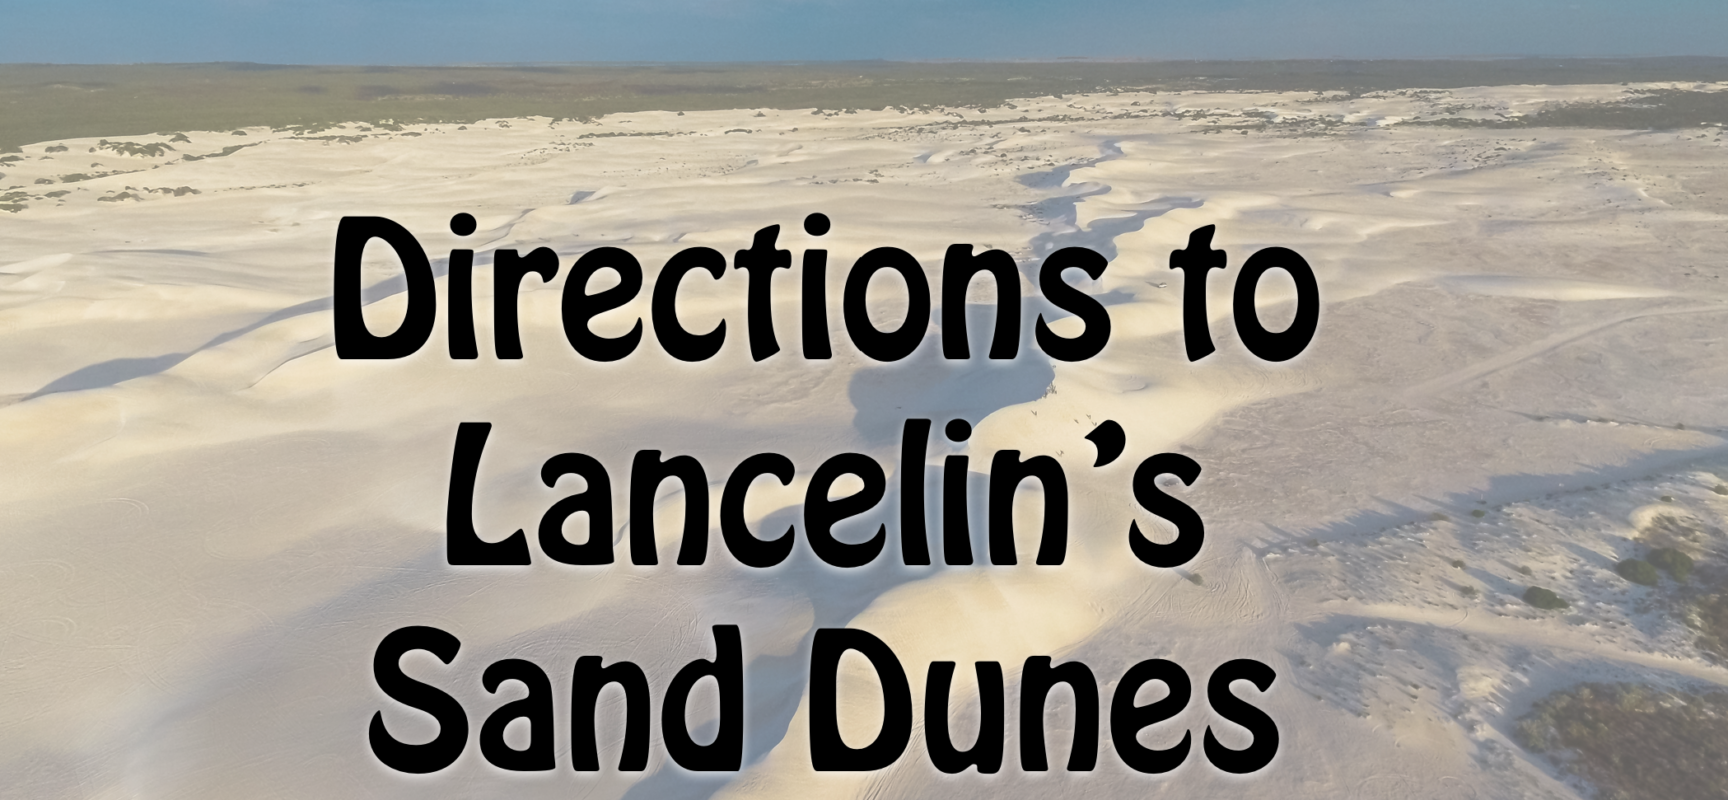 VIDEO DIRECTIONS TO THE DUNES